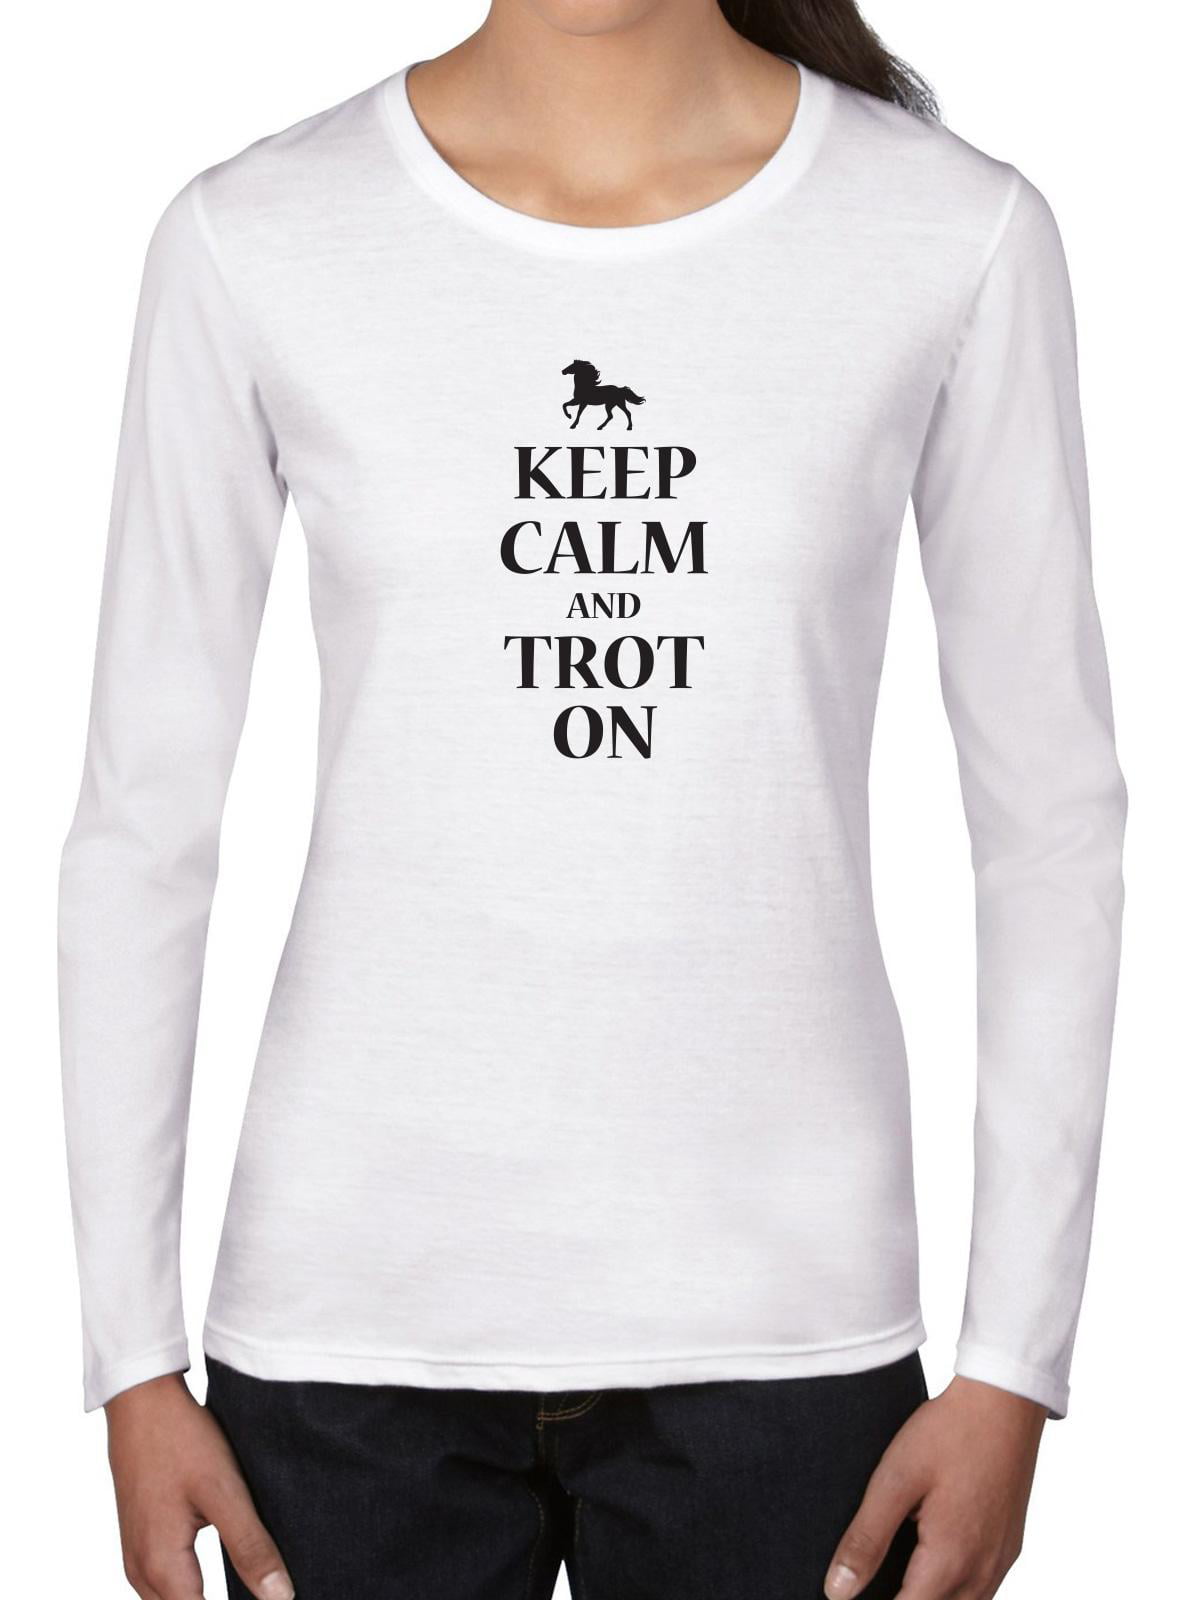 KEEP CALM AND TROT ON LADIES FITTED T-SHIRT HORSERIDING TSHIRT RIDING S-XXL